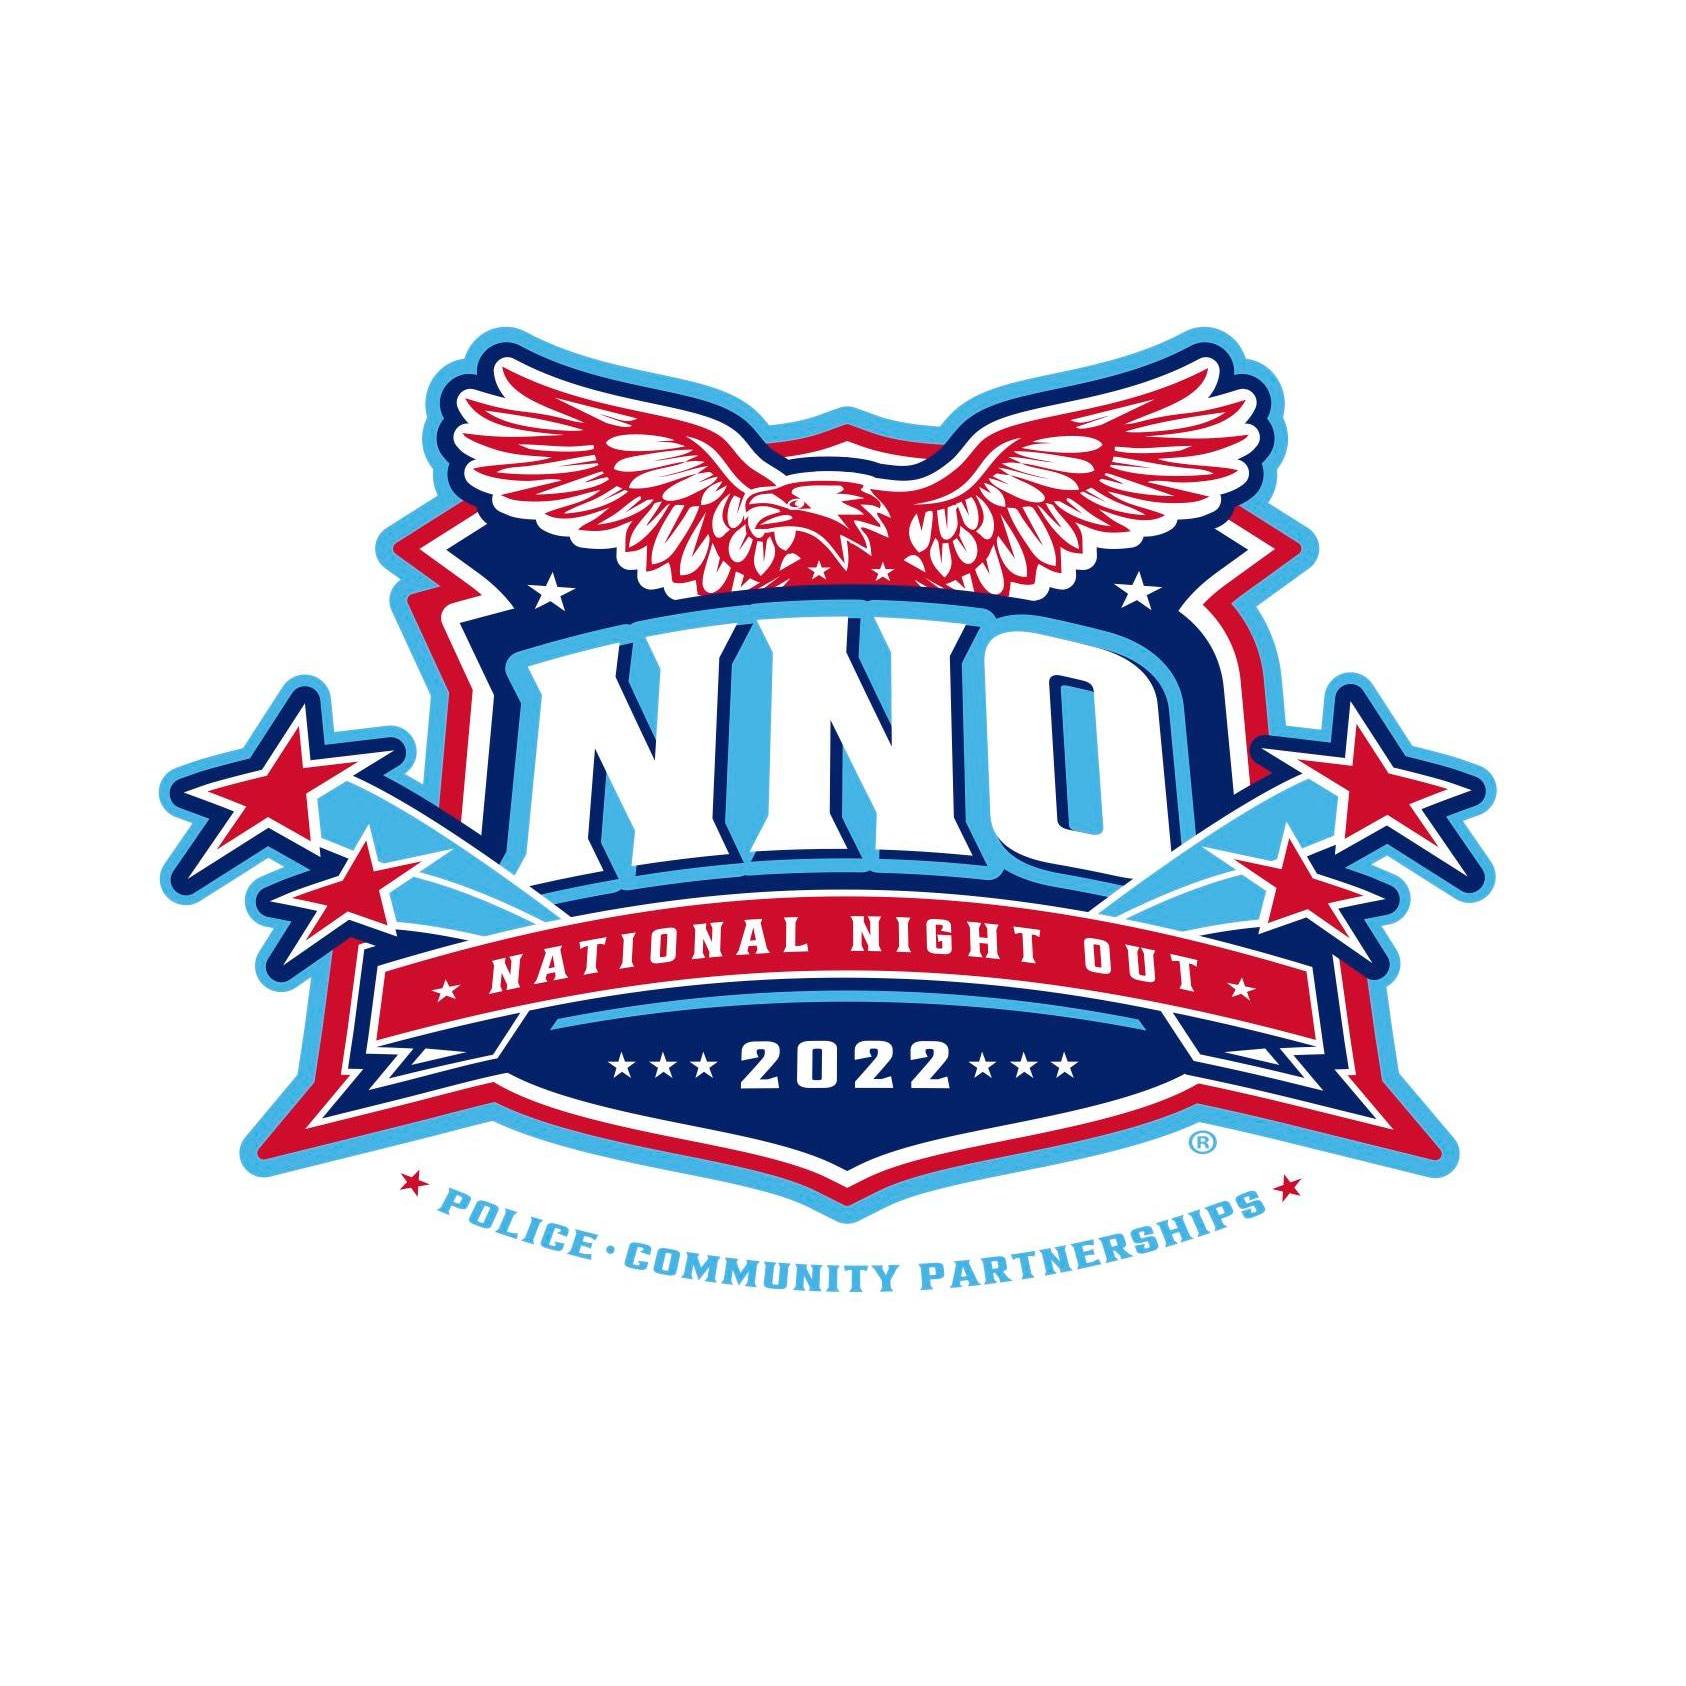 
National Night Out 2022